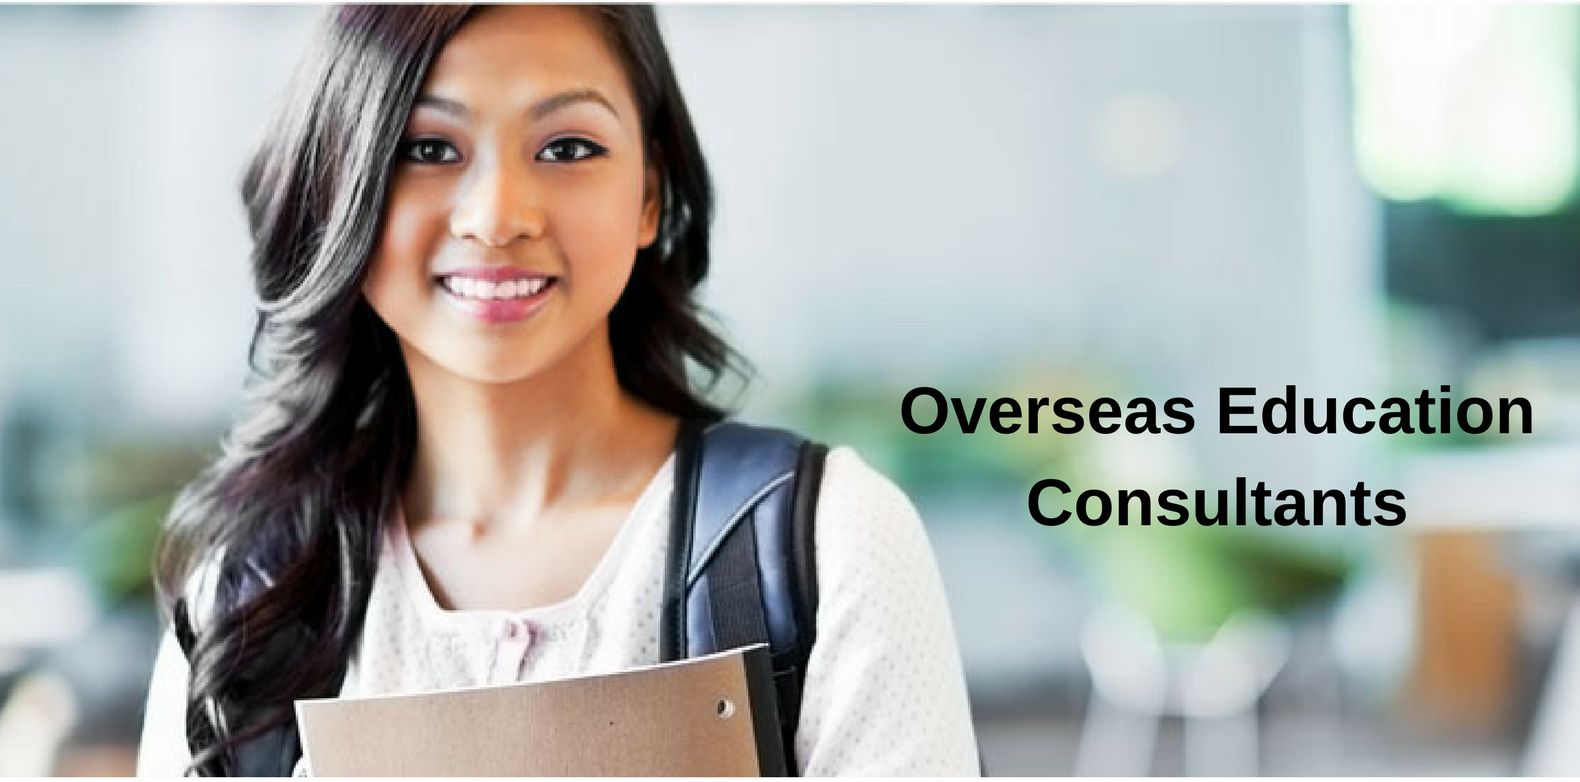 study in canada, overseas education consultants